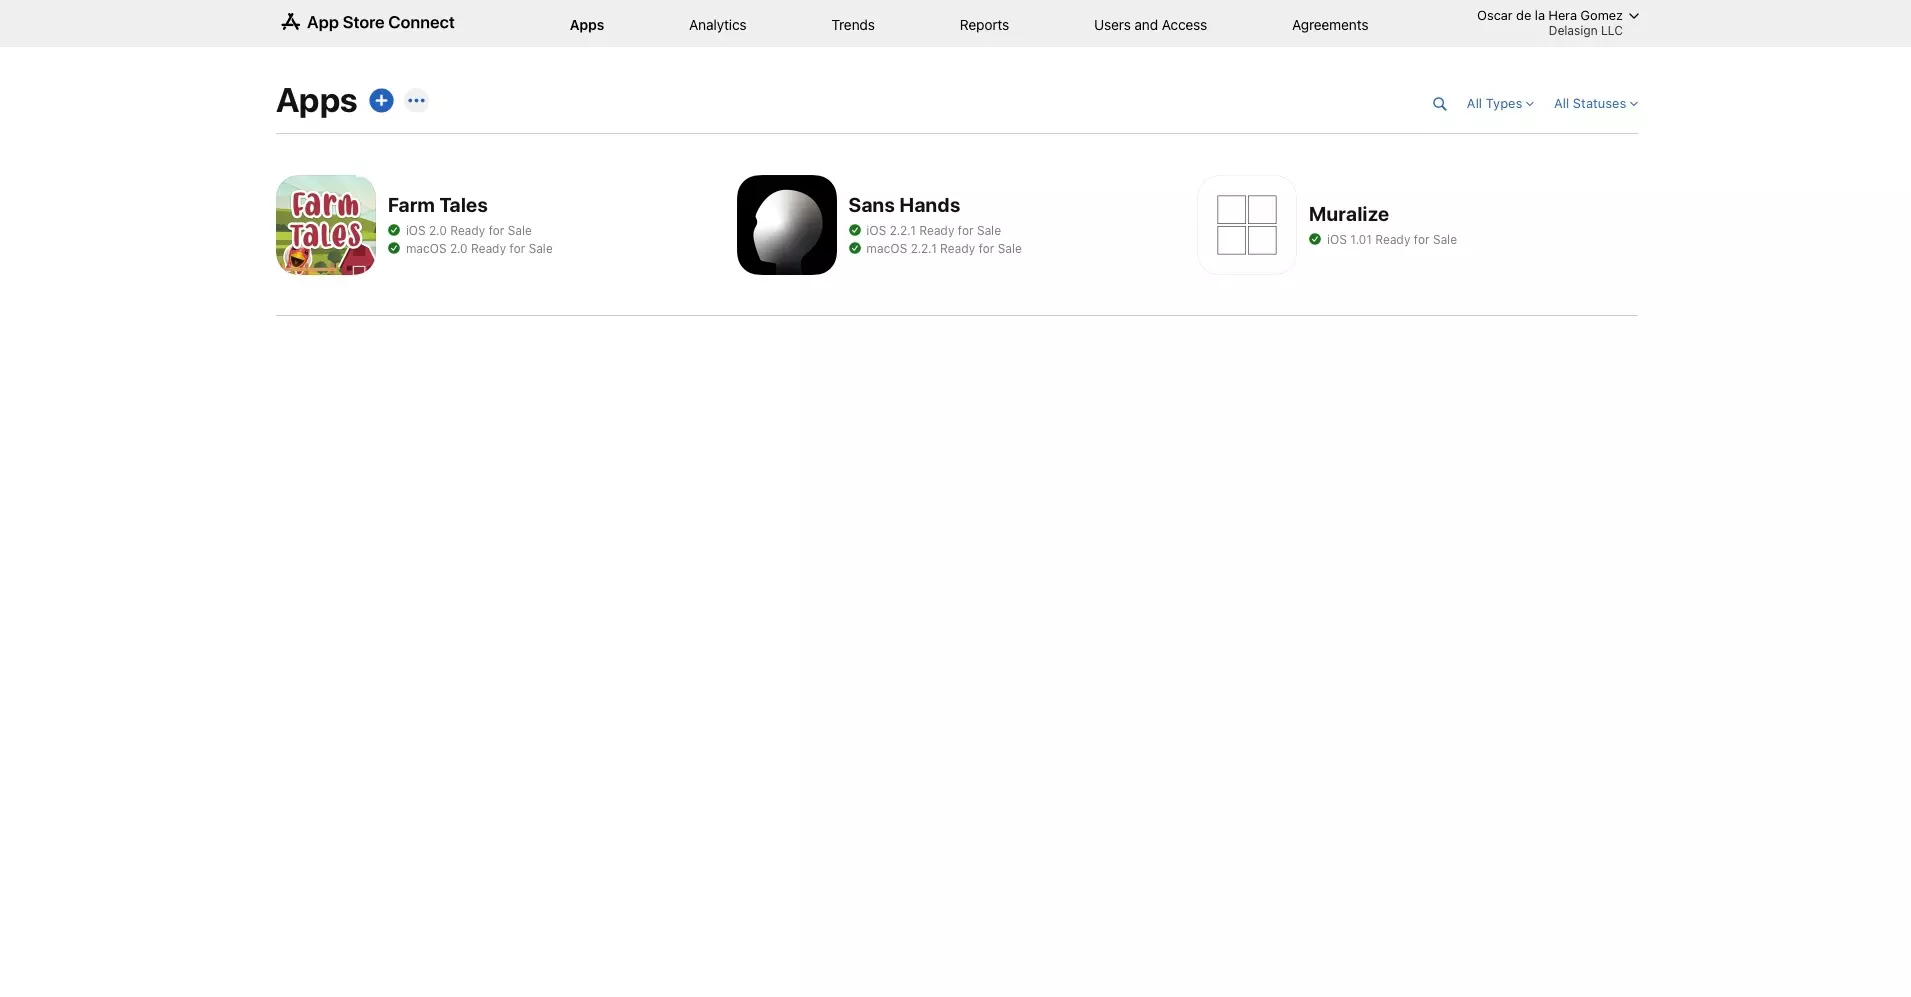 A screenshot of the delasign App Store Connect "My Apps" page, showing the apps we have on the market.